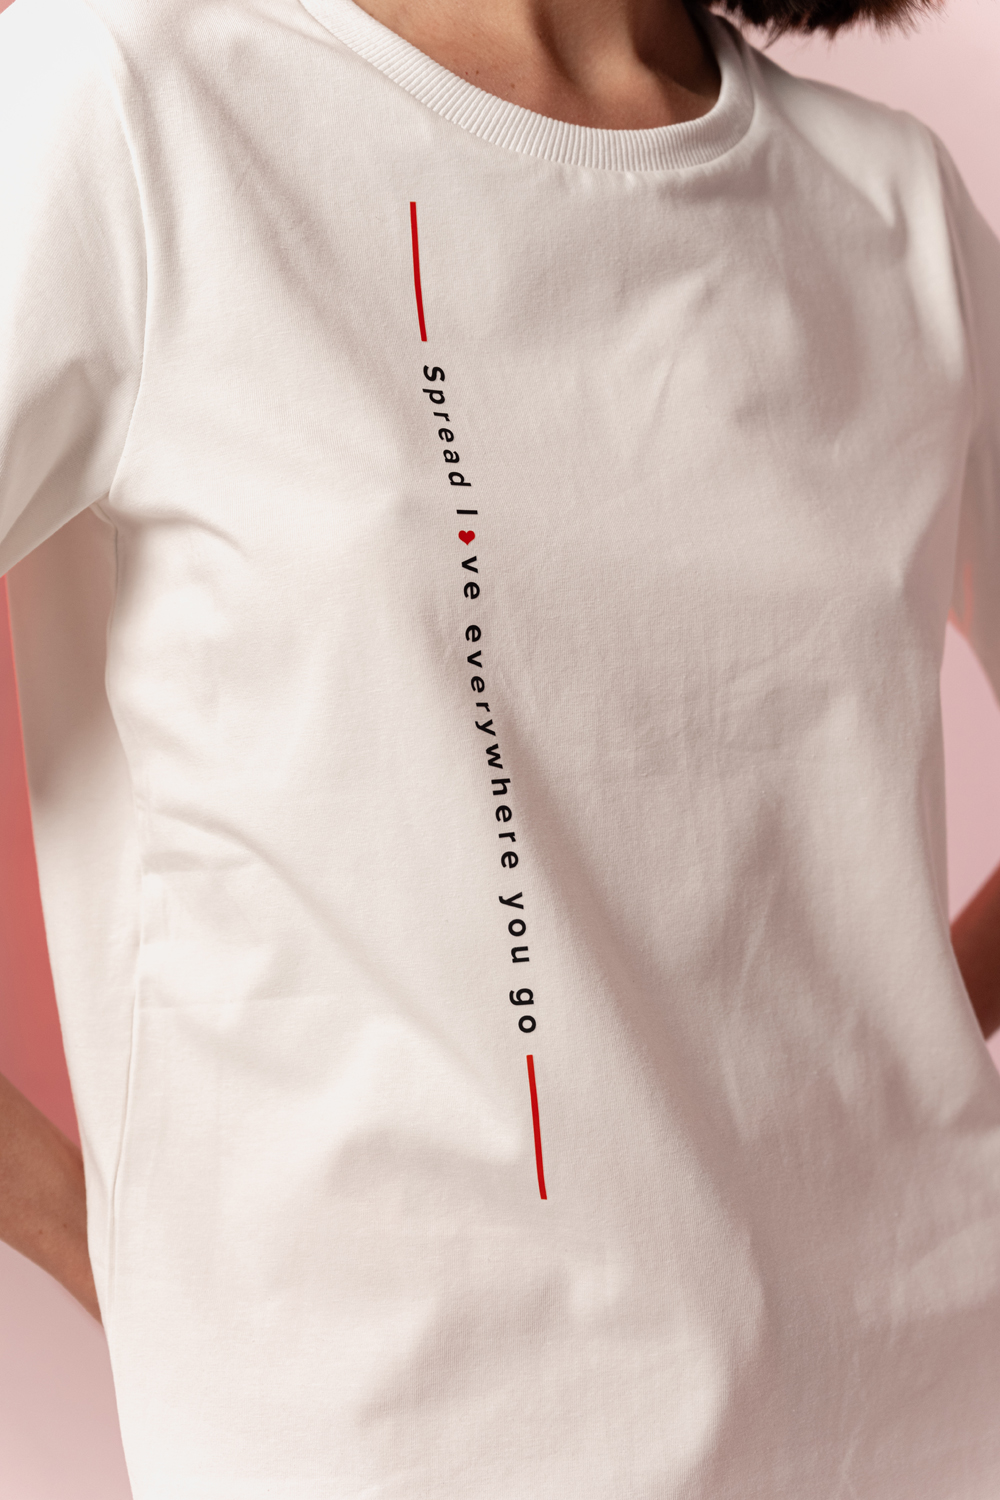 White straight t-shirt with vertical lettering